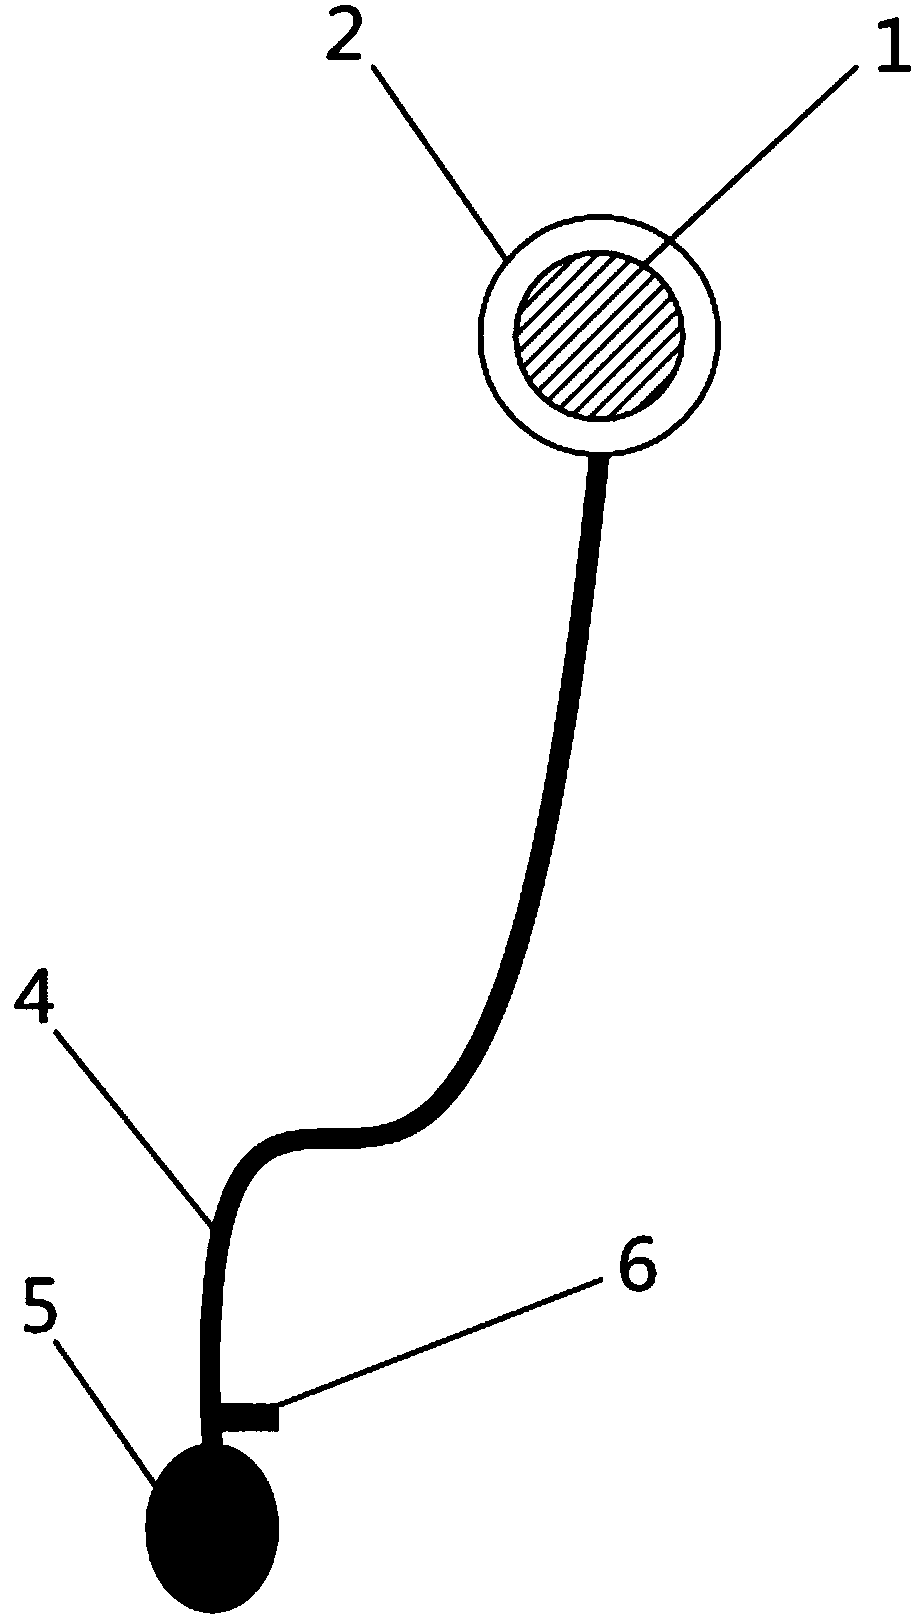 Bowel sound acquisition system and acquisition method based on multi-channel electronic stethoscope